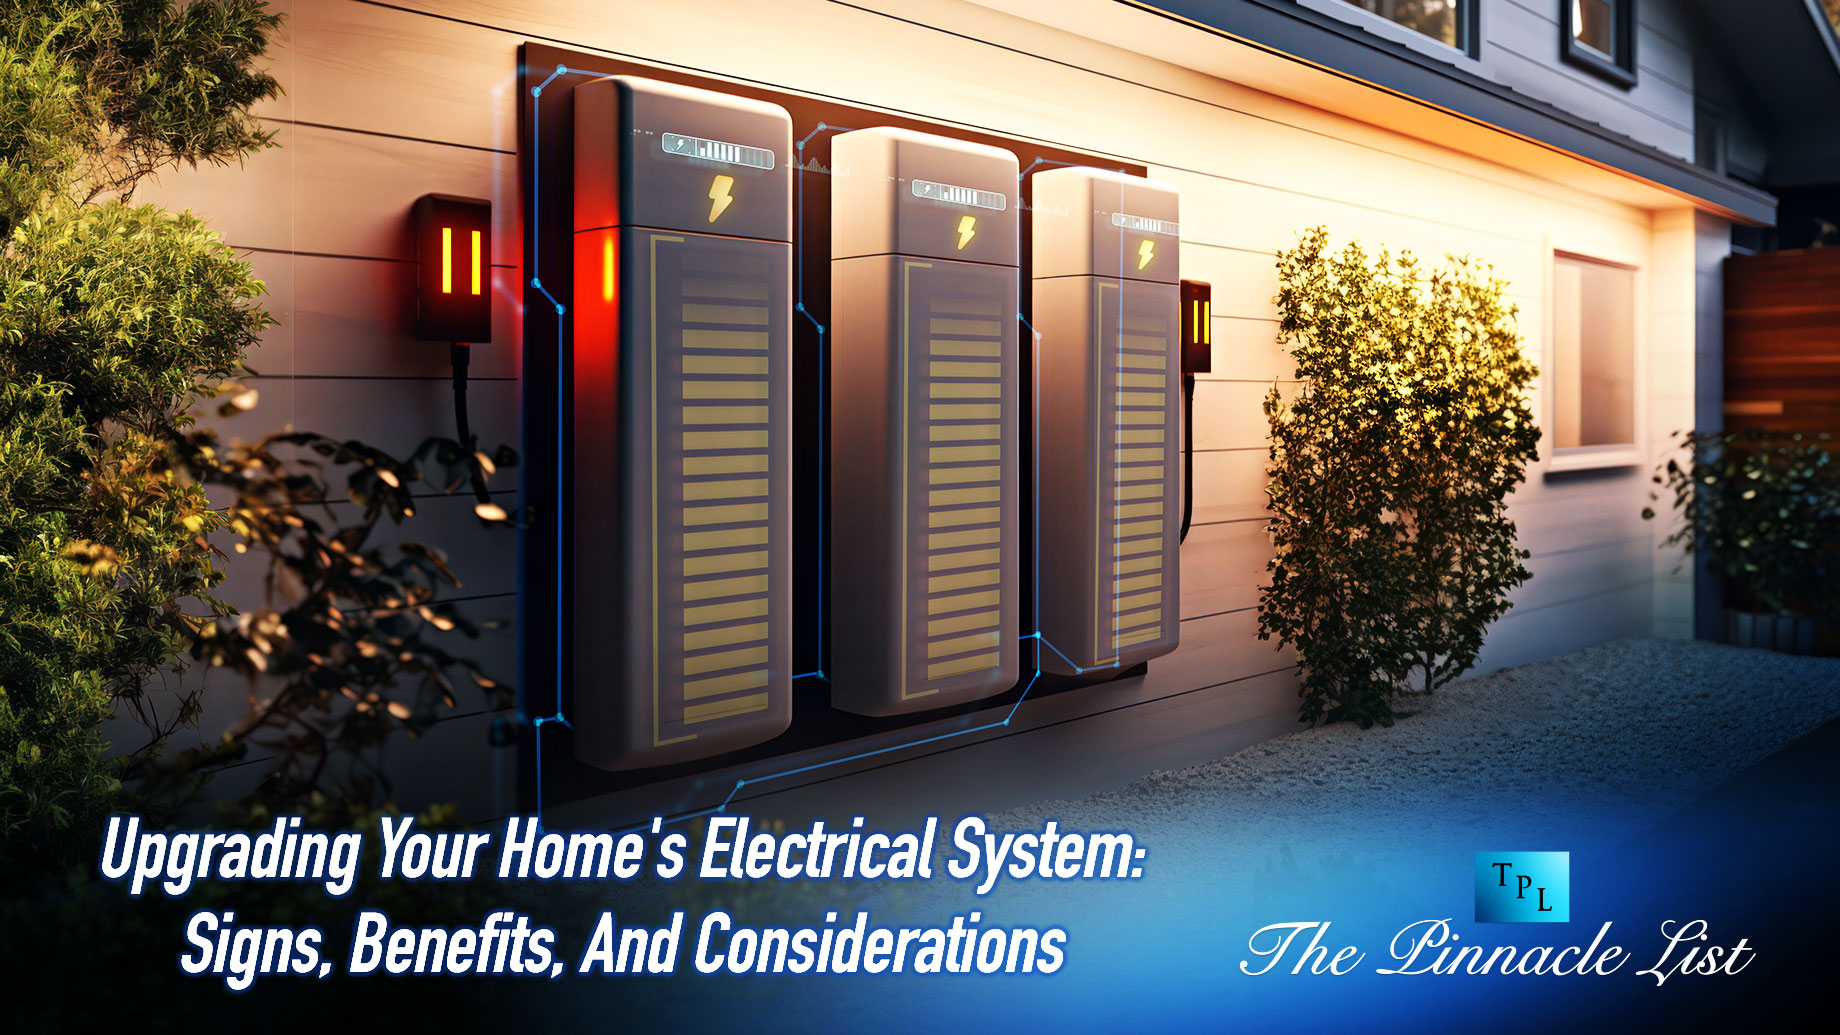 Upgrading Your Home's Electrical System: Signs, Benefits, And Considerations